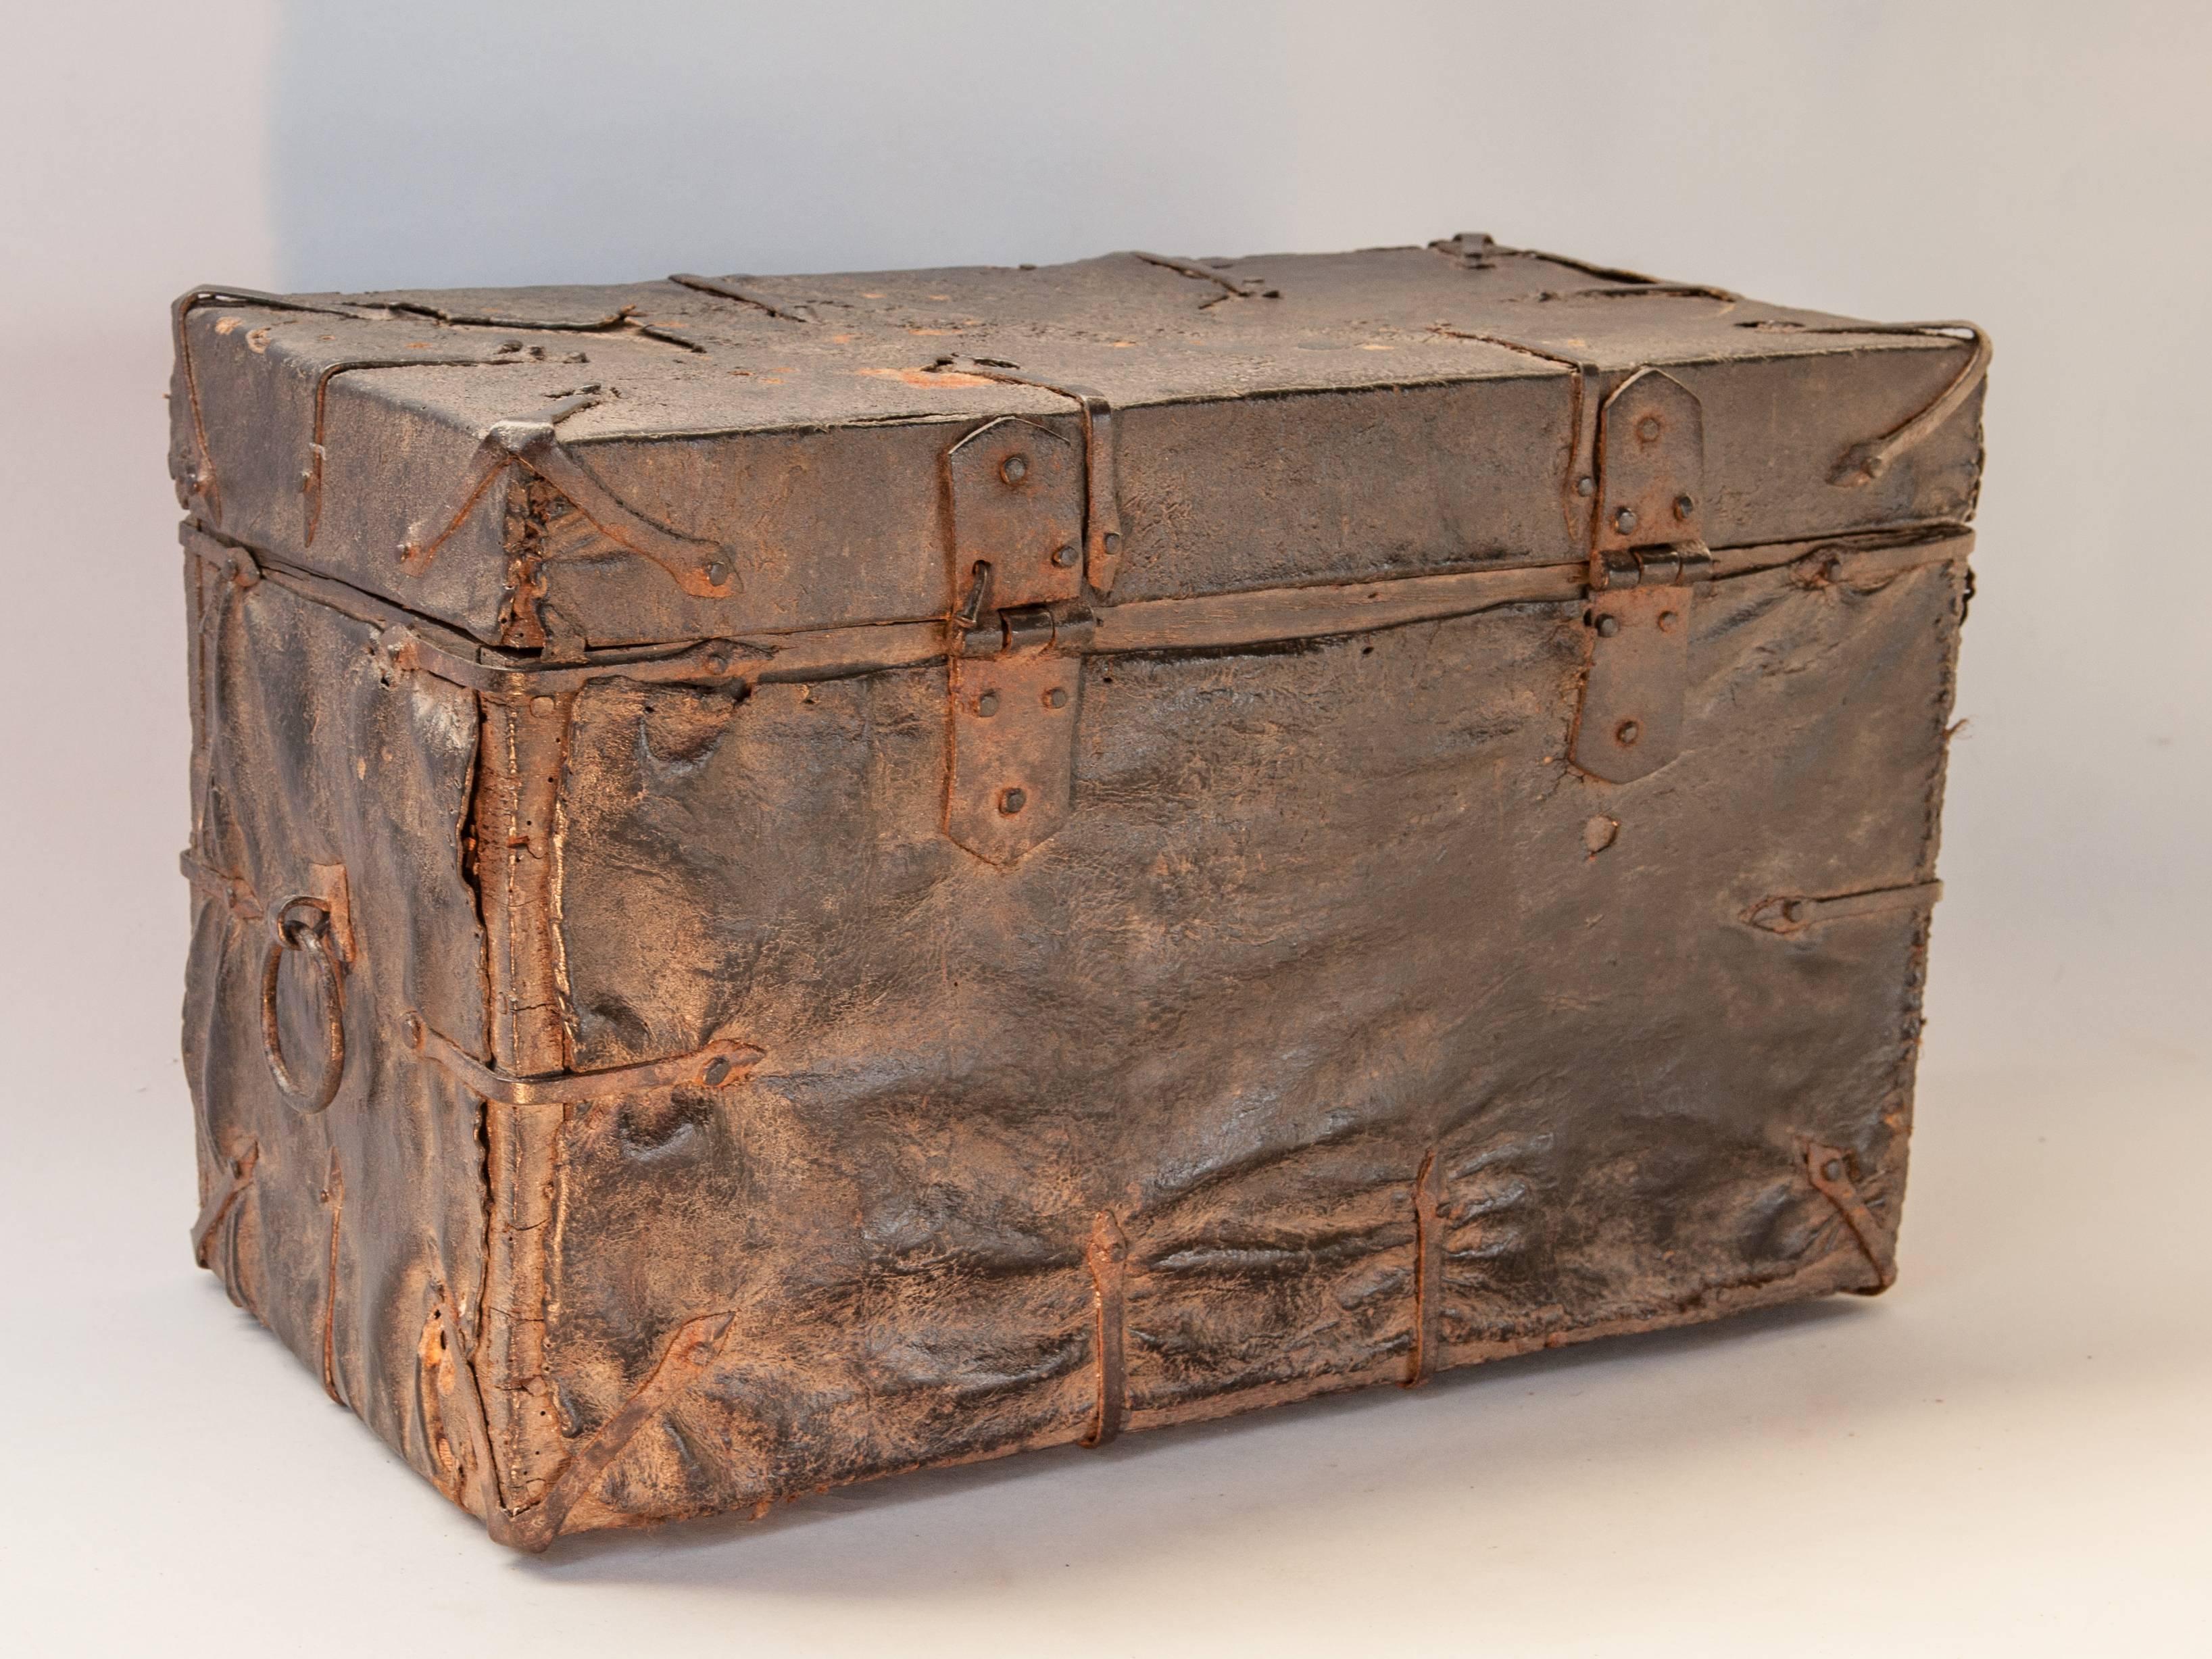 Tibetan Vintage Wooden and Leather Chest from Tibet, Early-Mid 20th Century.